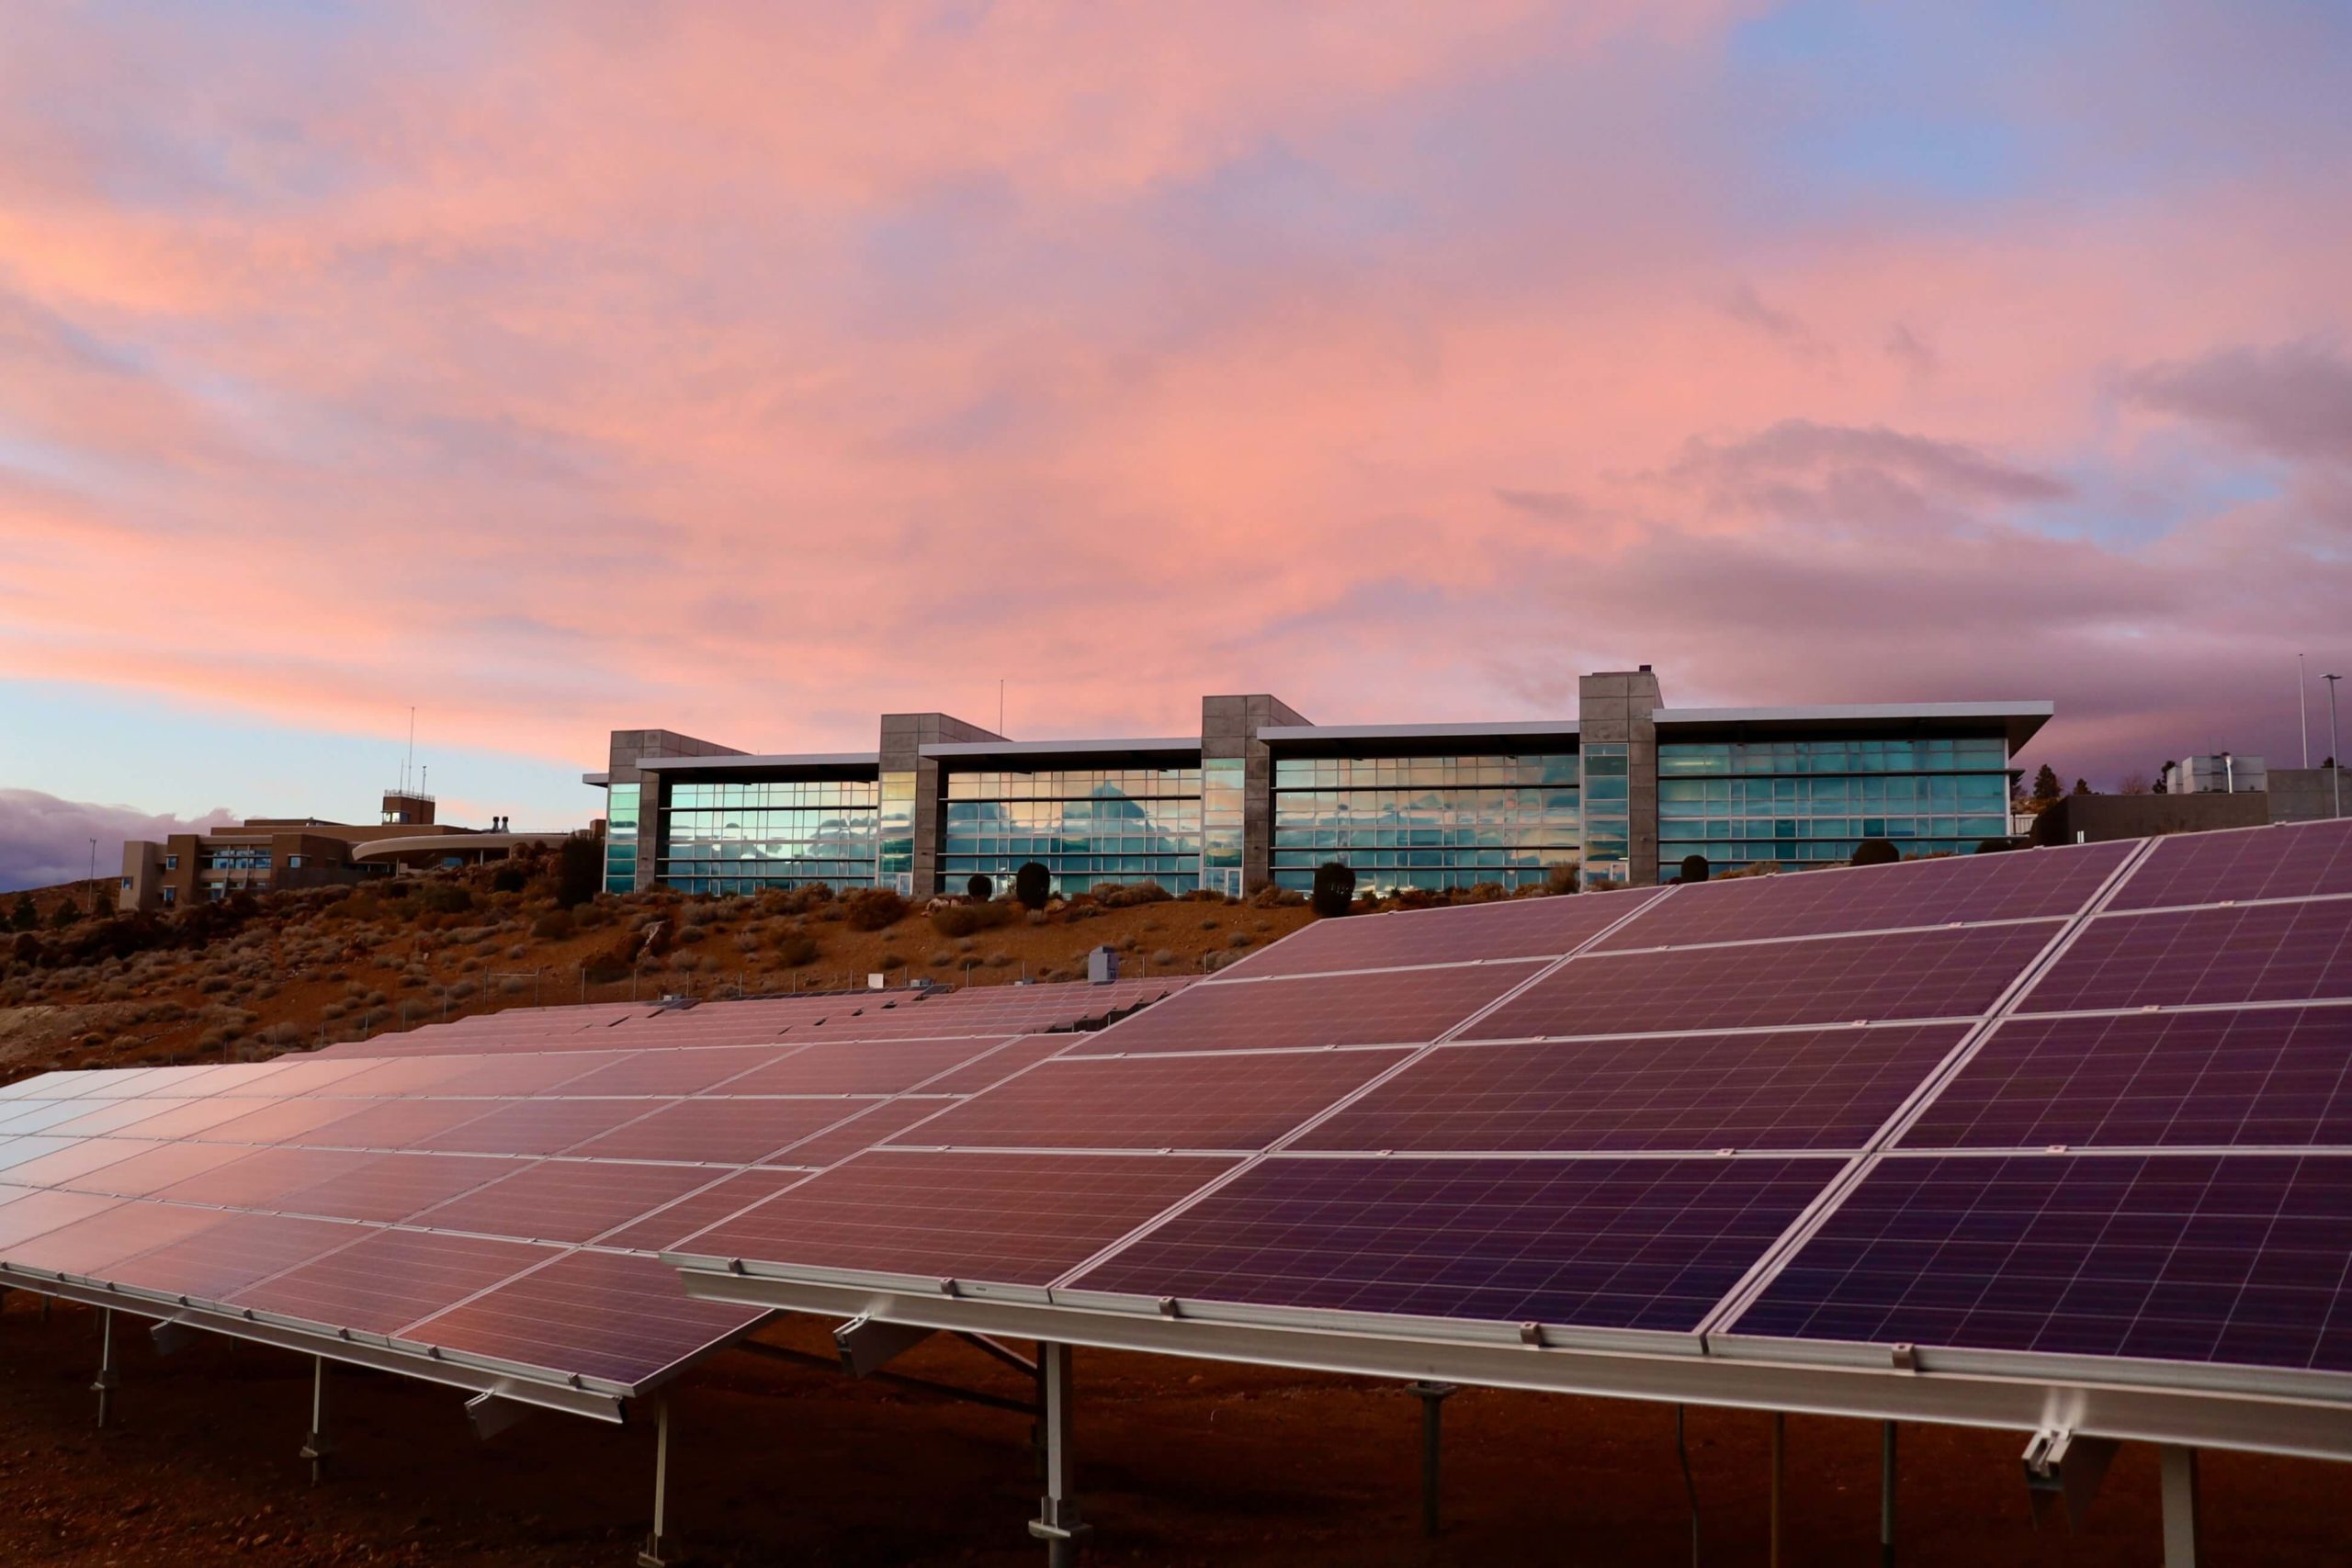 Solar panels used by an office building to harvest energy